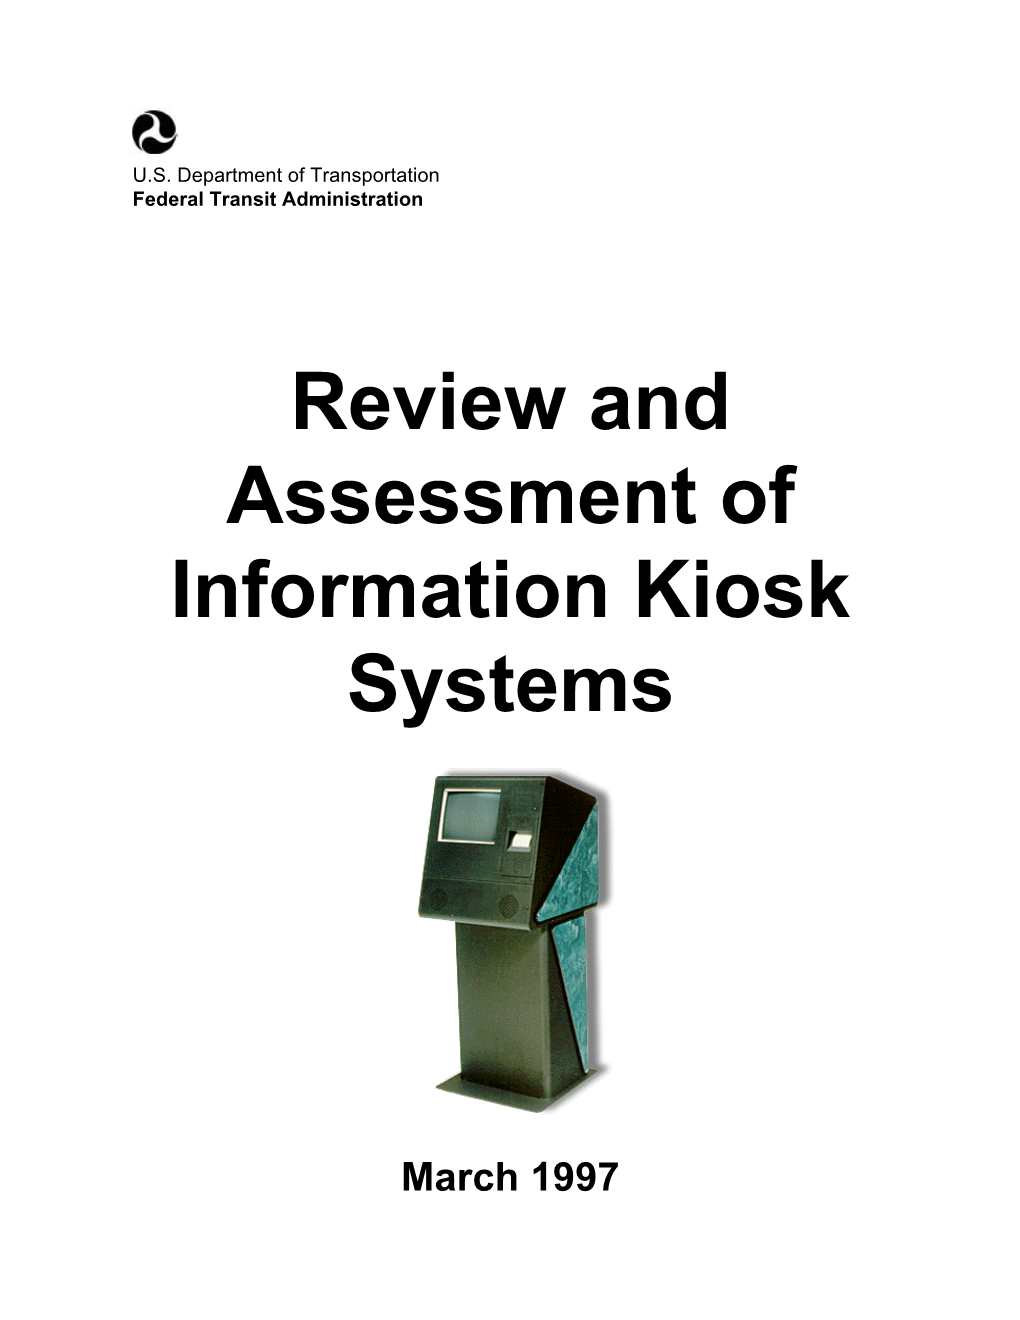 Review and Assessment of Information Kiosk Systems